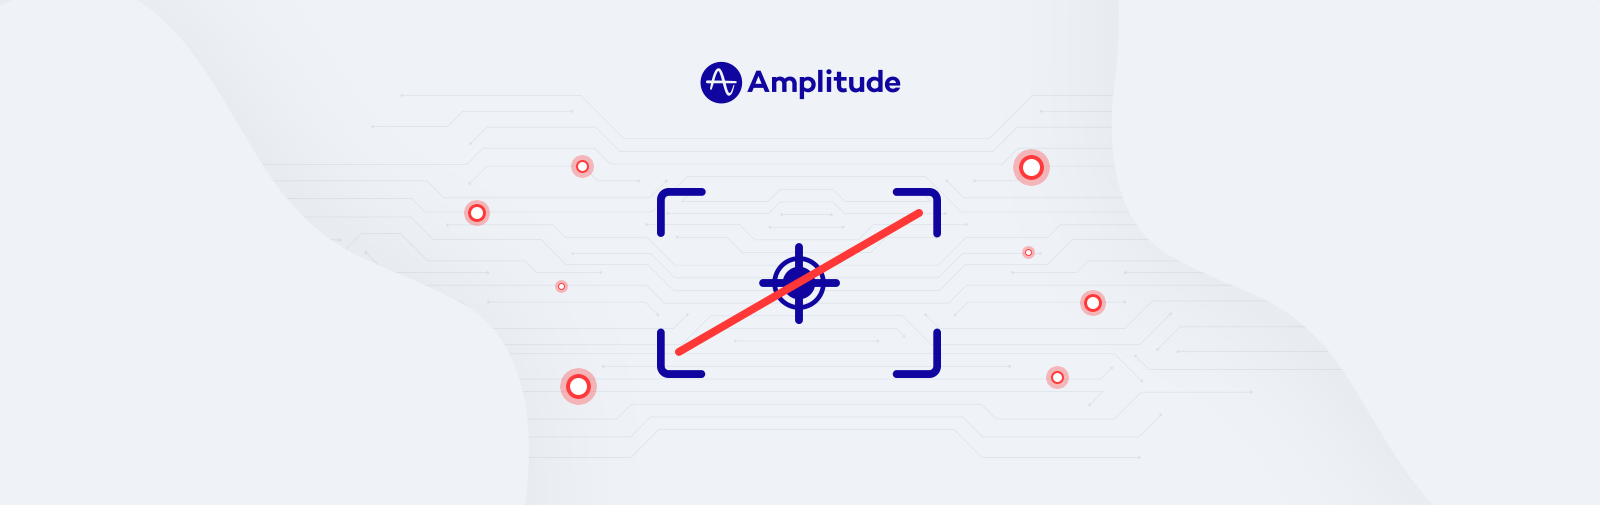 Why We Didn’t Build Auto-tracking for Amplitude Large